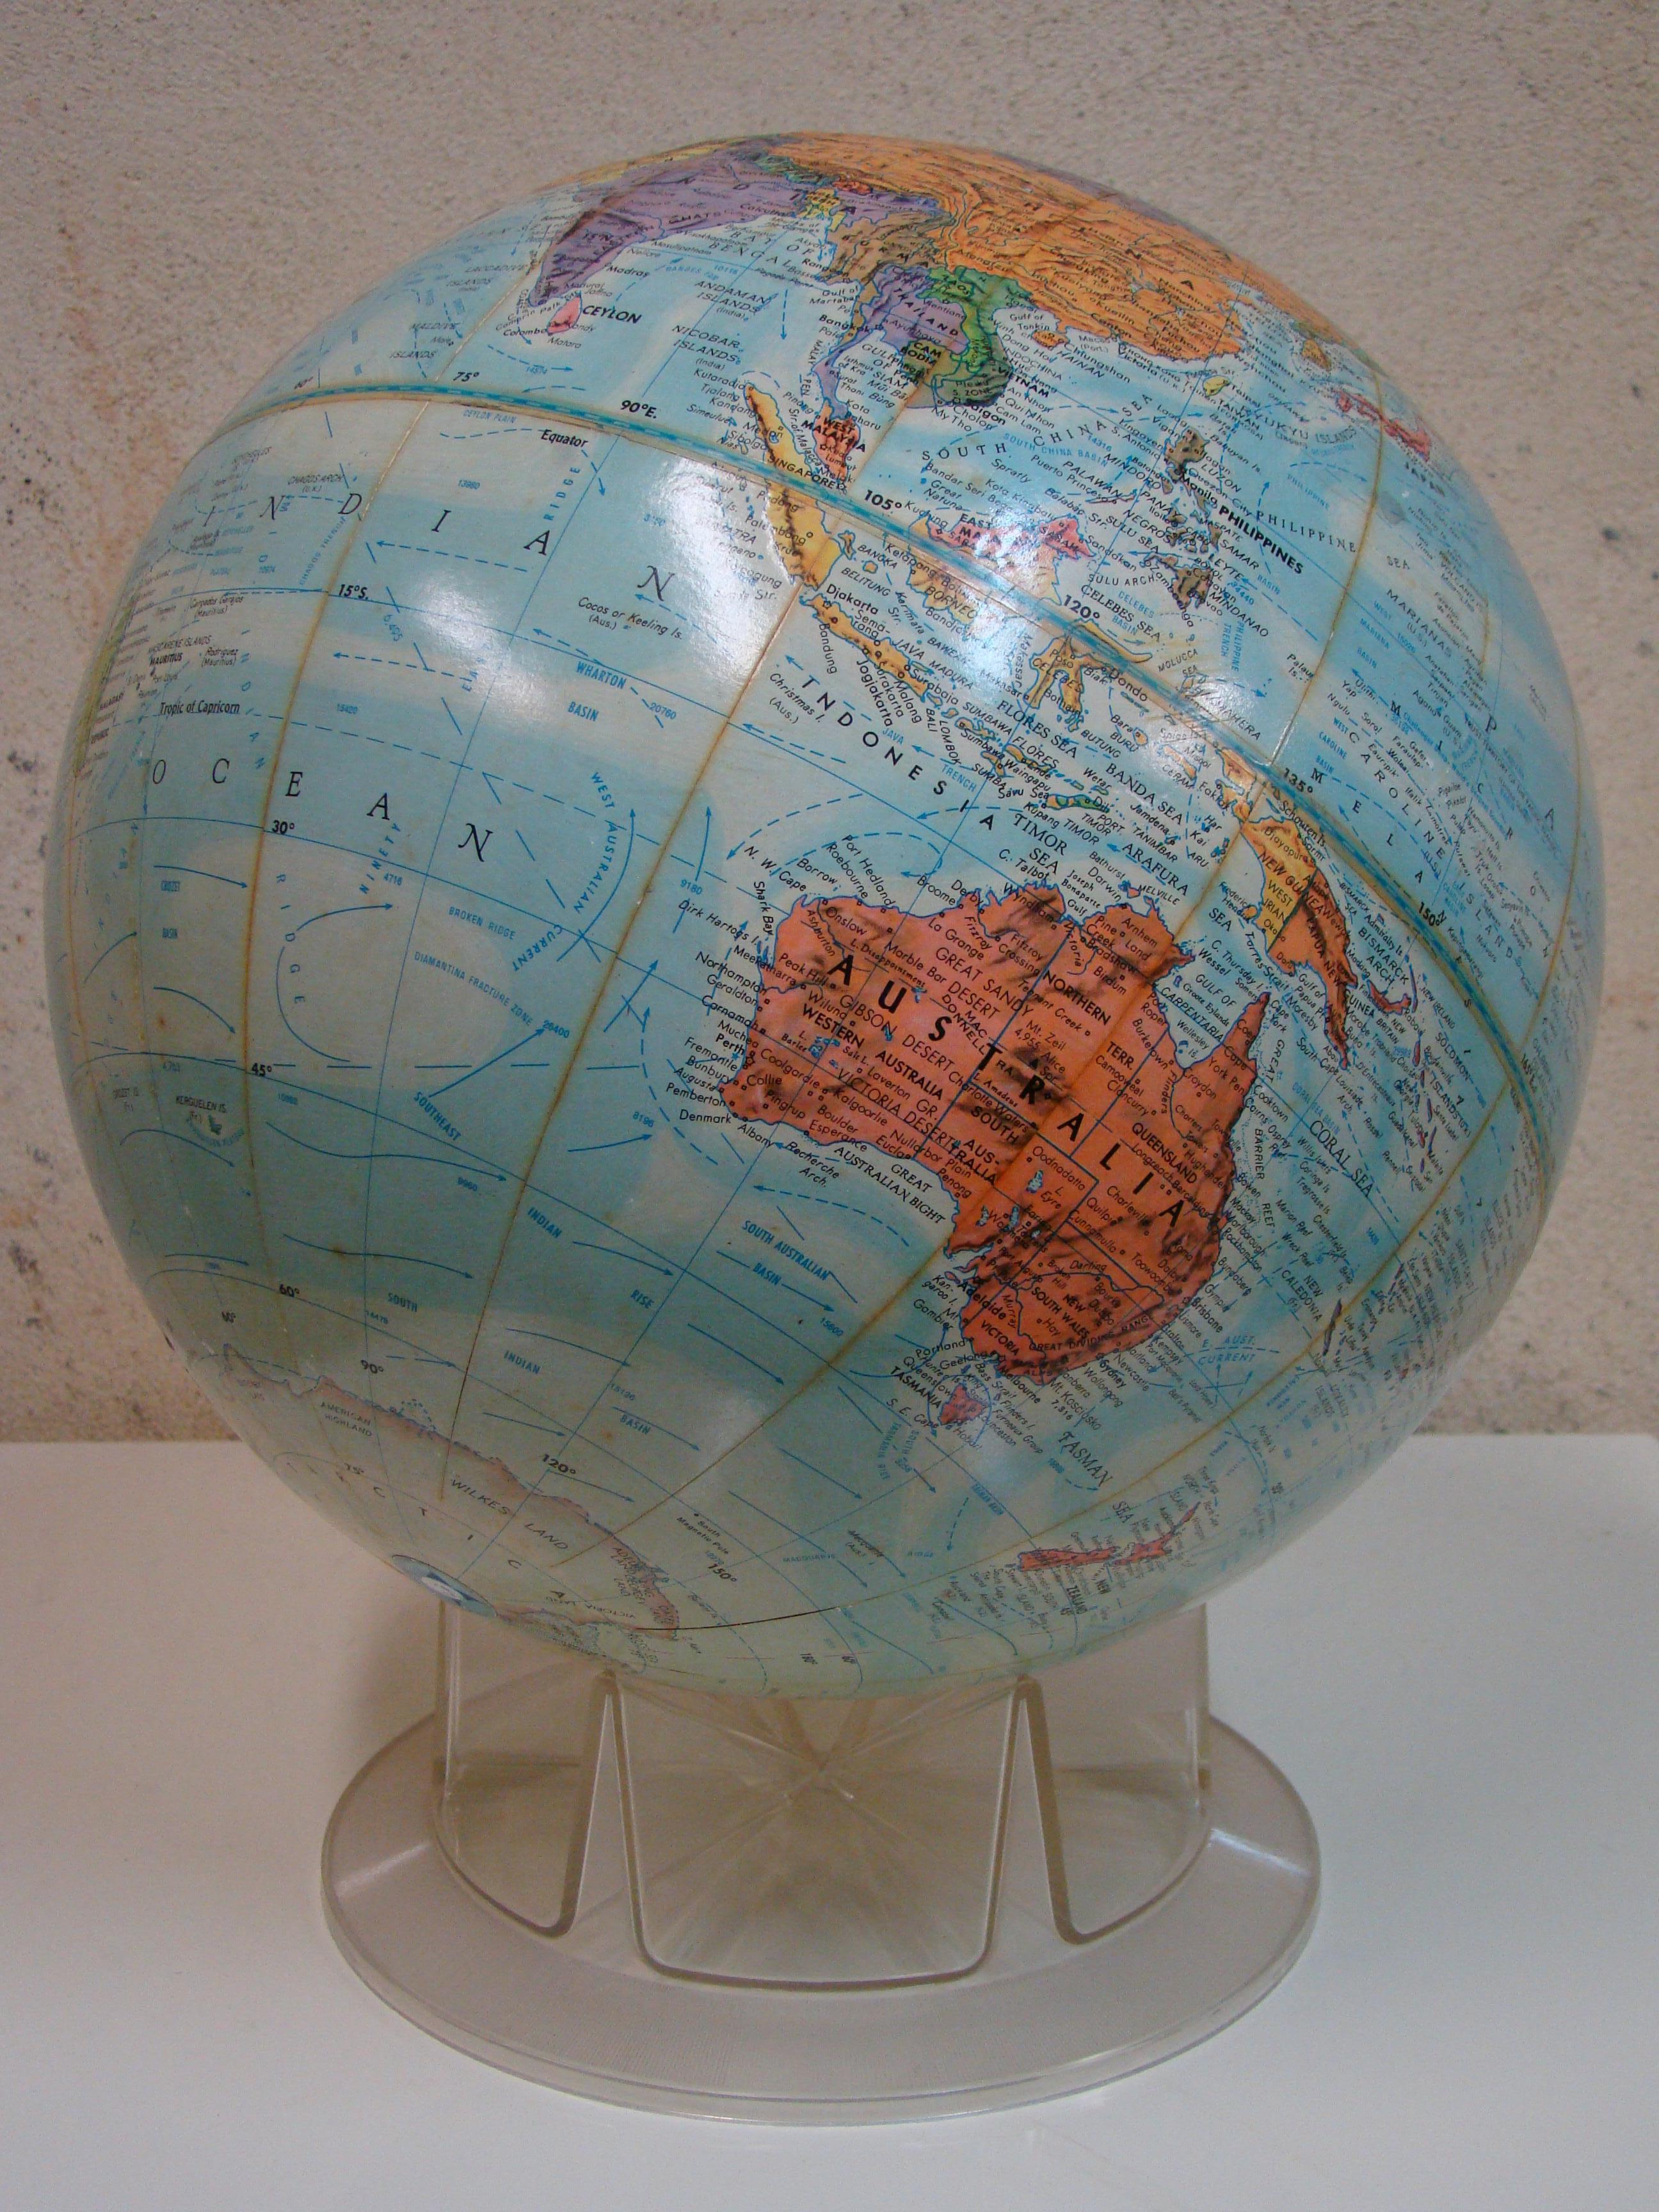 The beautifully placed colors and subtle topographical texture in this cardboard core and printed paper globe set it apart from many. This will quickly become your favorite. Simple in design, the free floating globe is cradled by a clear, plastic